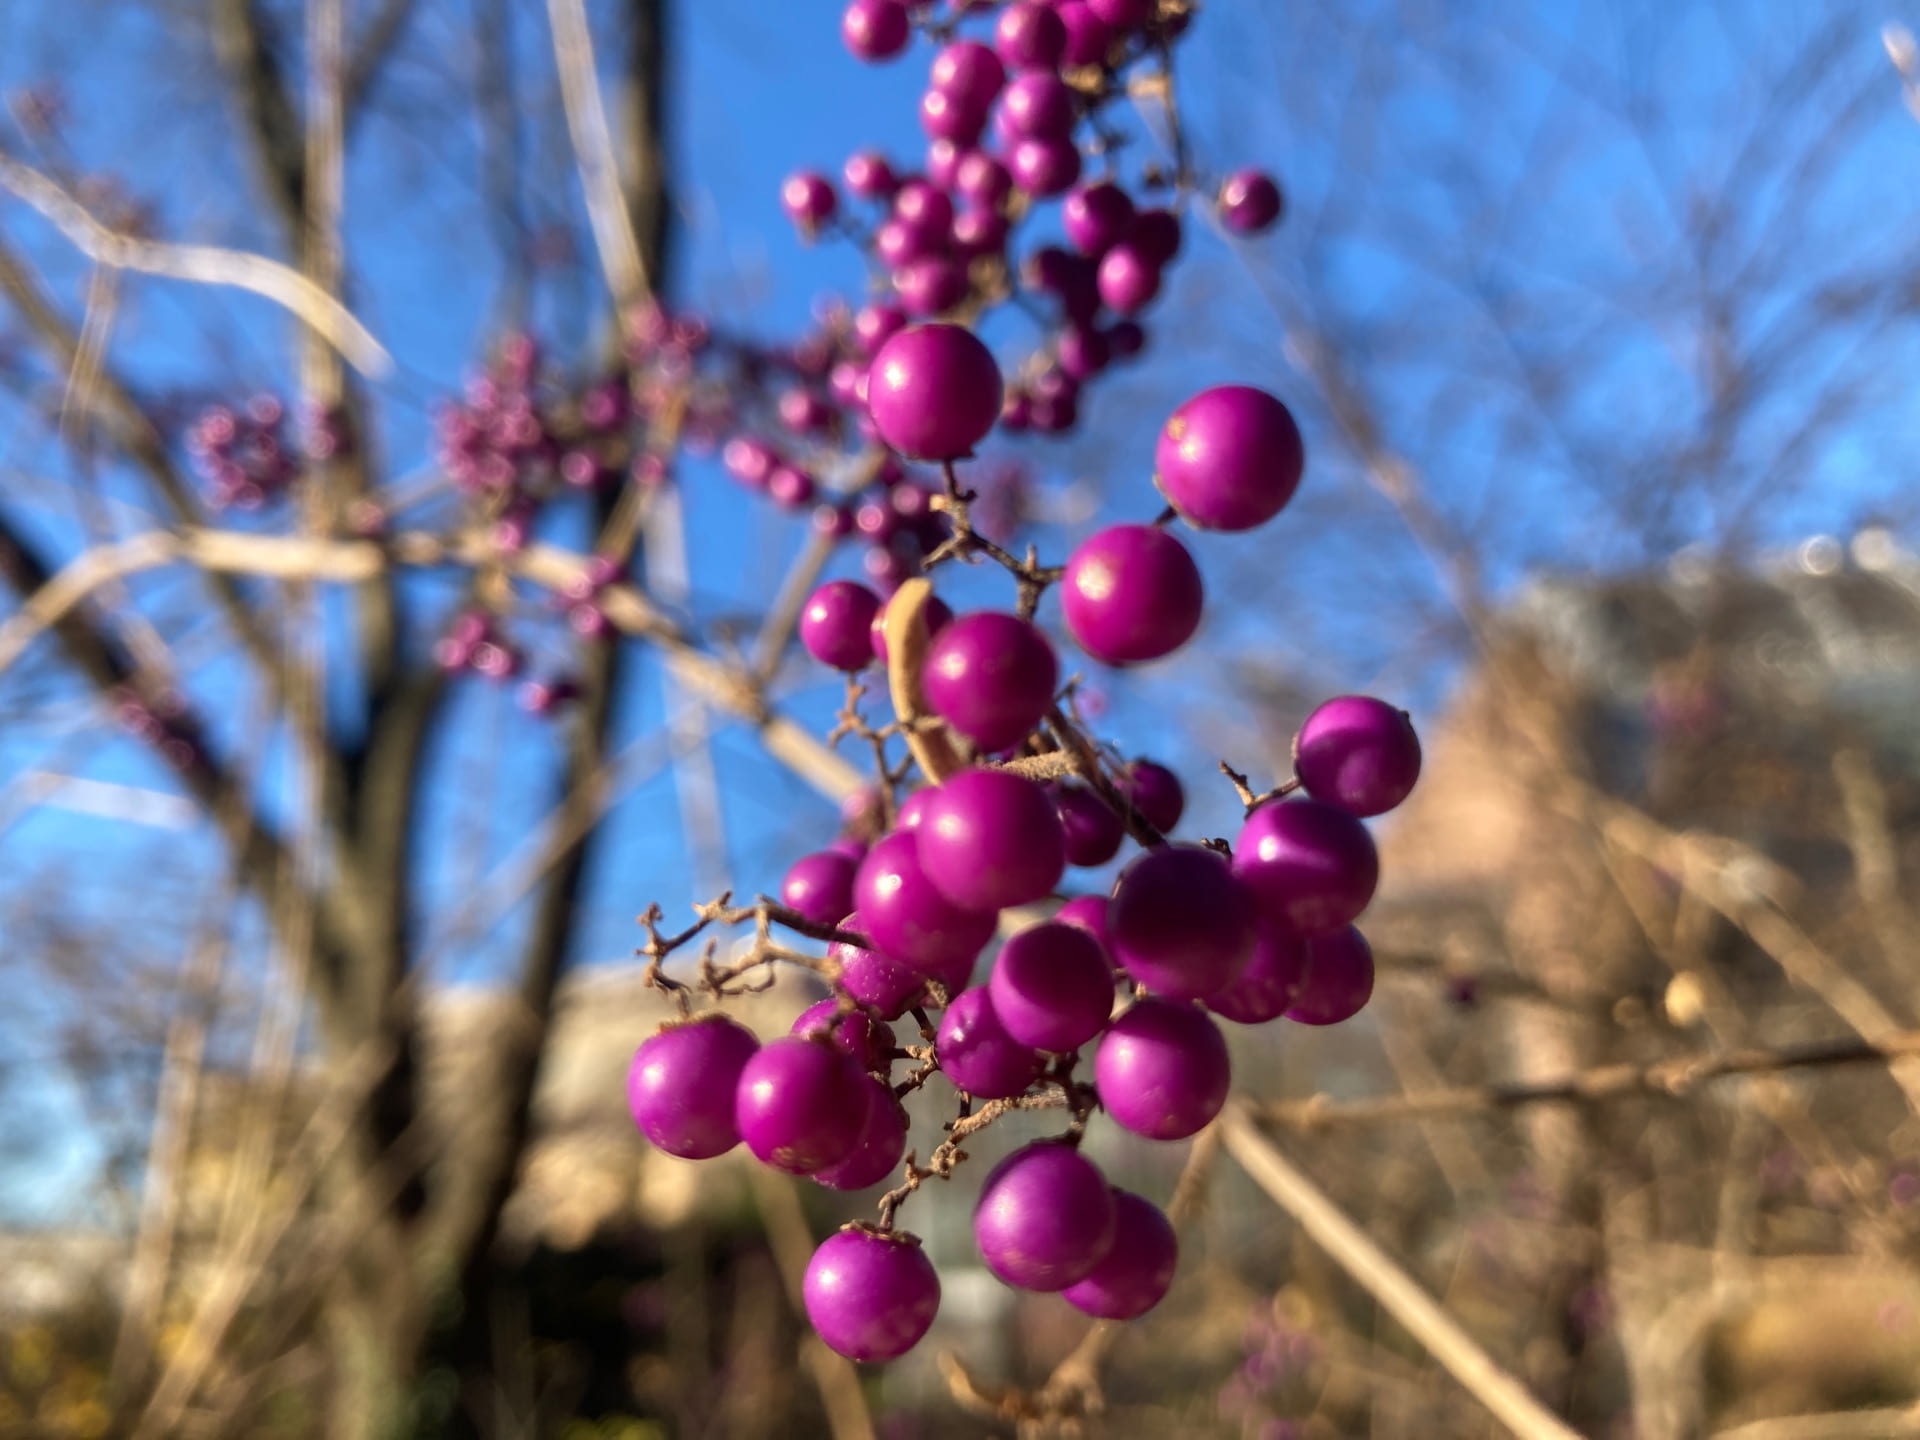 The small violet fruits of Callicarpa sp. stand out against the blue sky.